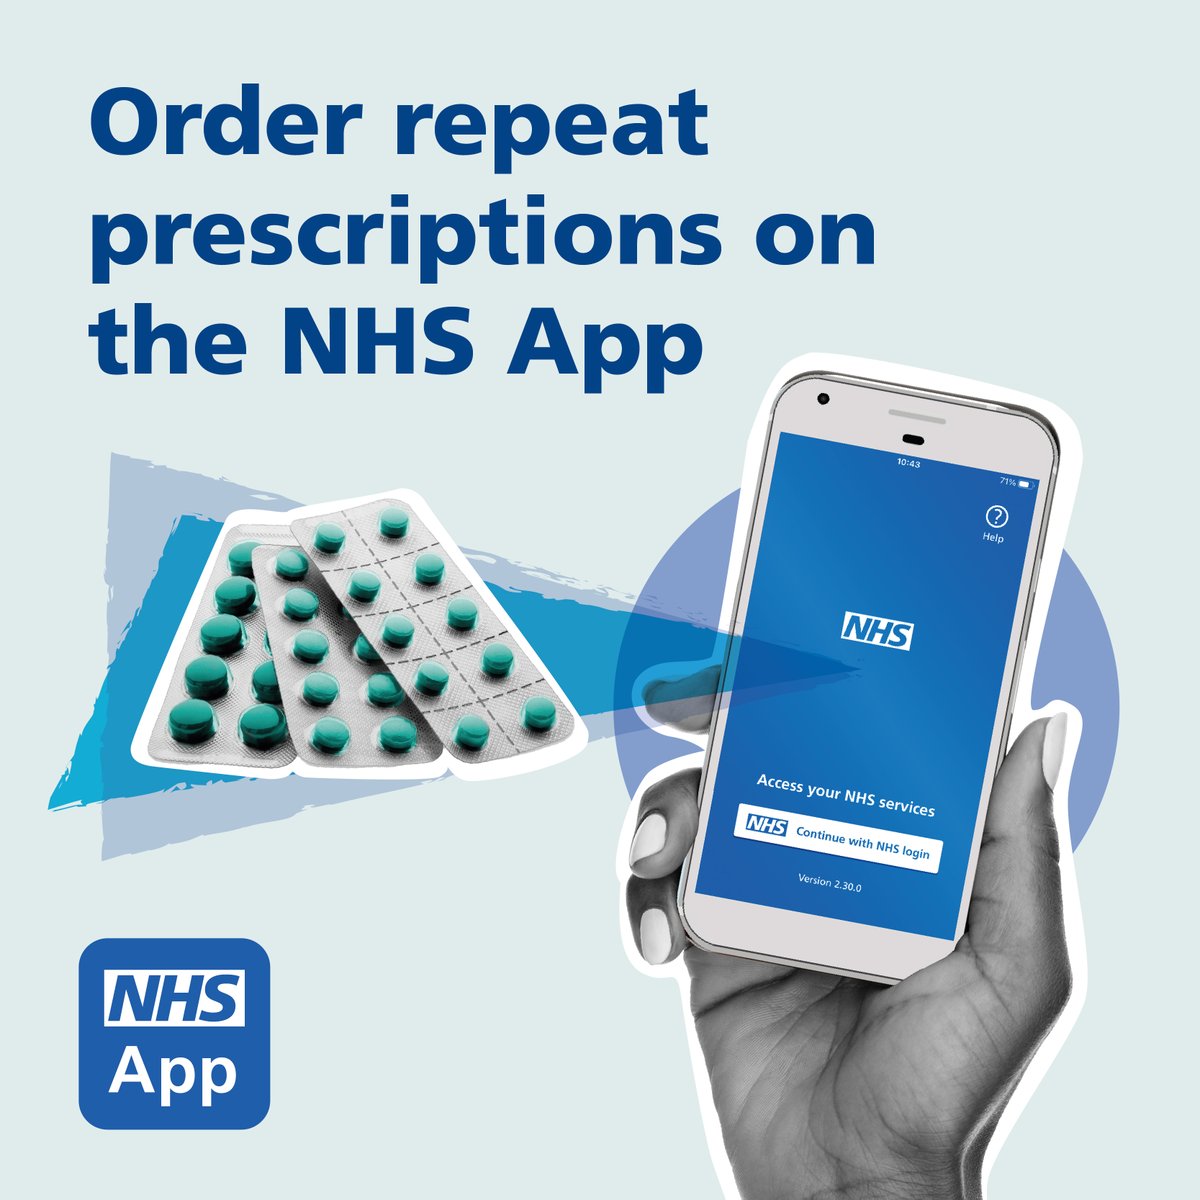 Did you know you can manage repeat prescriptions from your GP Surgery in the NHS App? You can easily change your nominated pharmacy and send orders when it’s convenient for you. Find out more: nhs.uk/nhsapp #DGSHealth #NHSApp